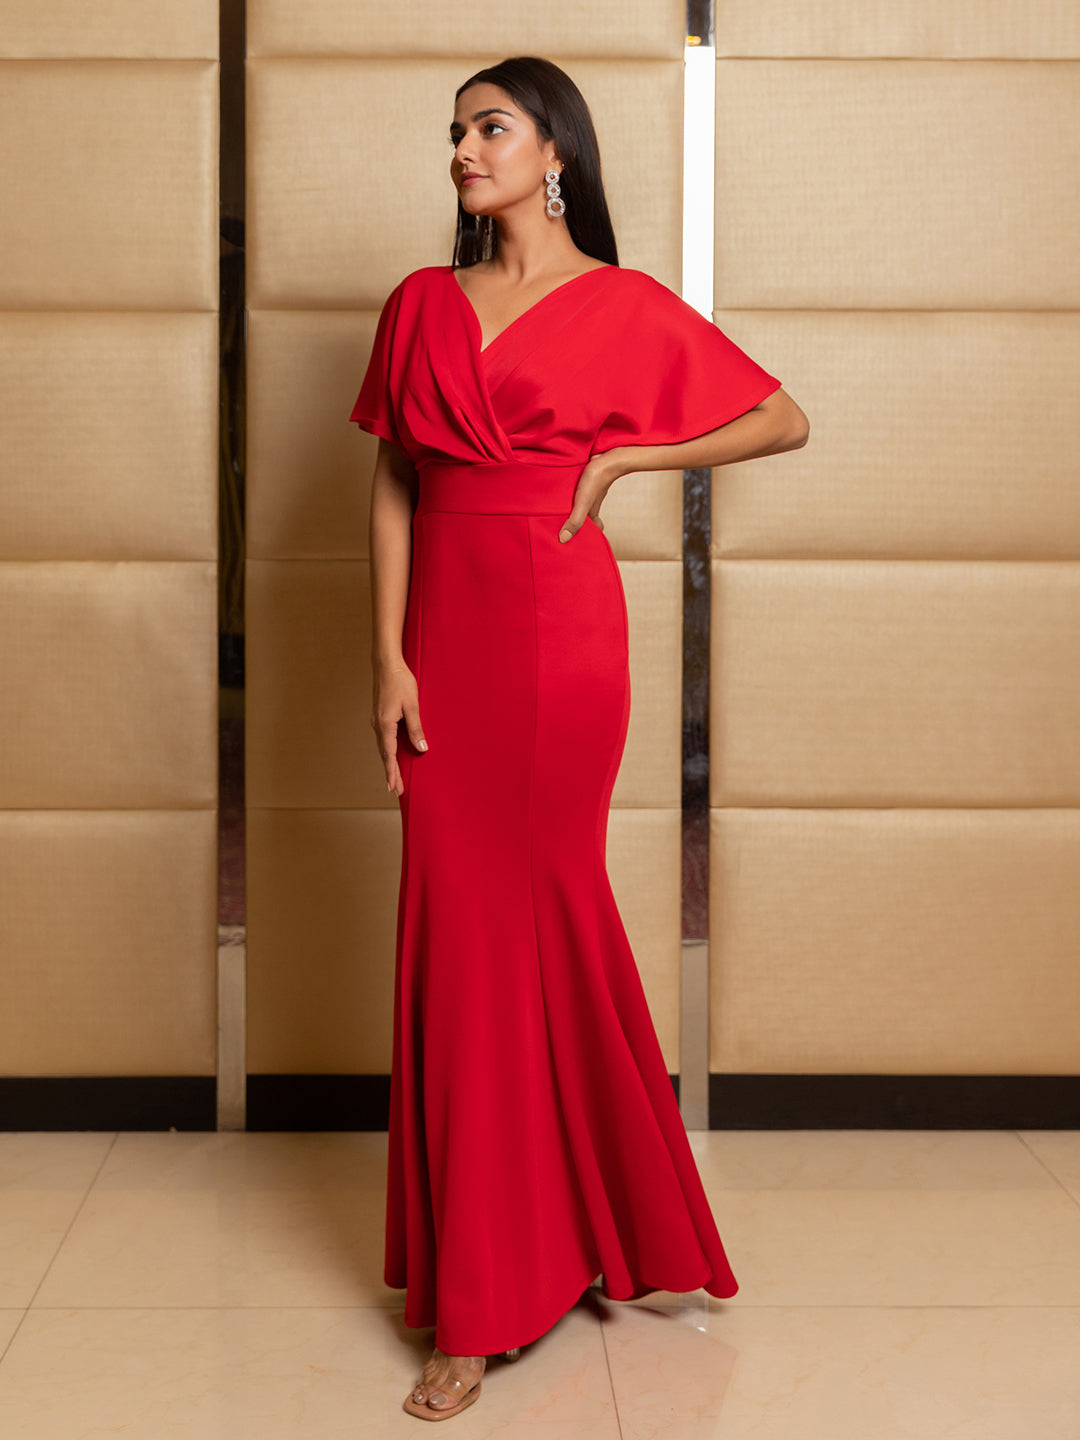 Get Discounted Red Party Dresses for Women Online Today